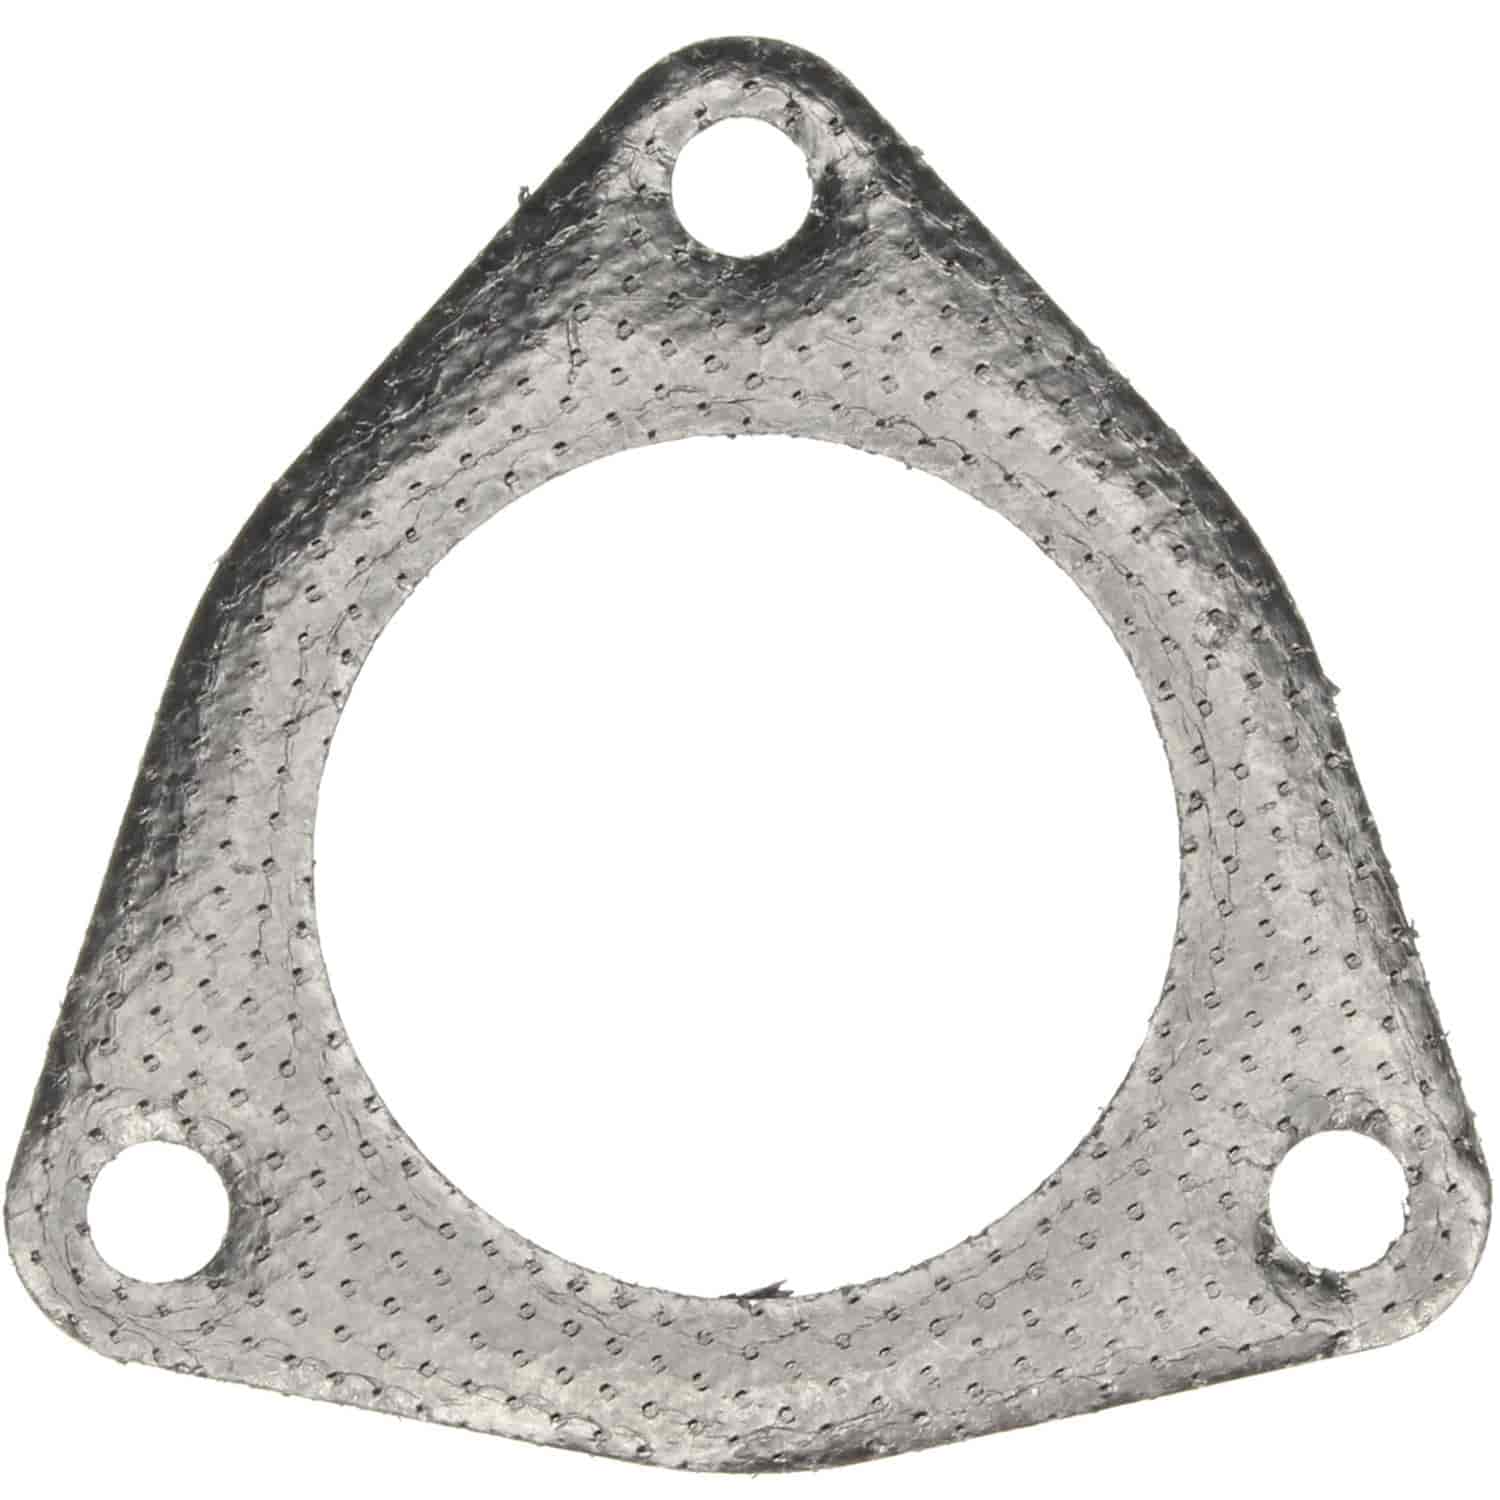 Catalytic Converter Gasket 1997-2003 Chevy/GMC L4 2.2L (S10-Series Truck)